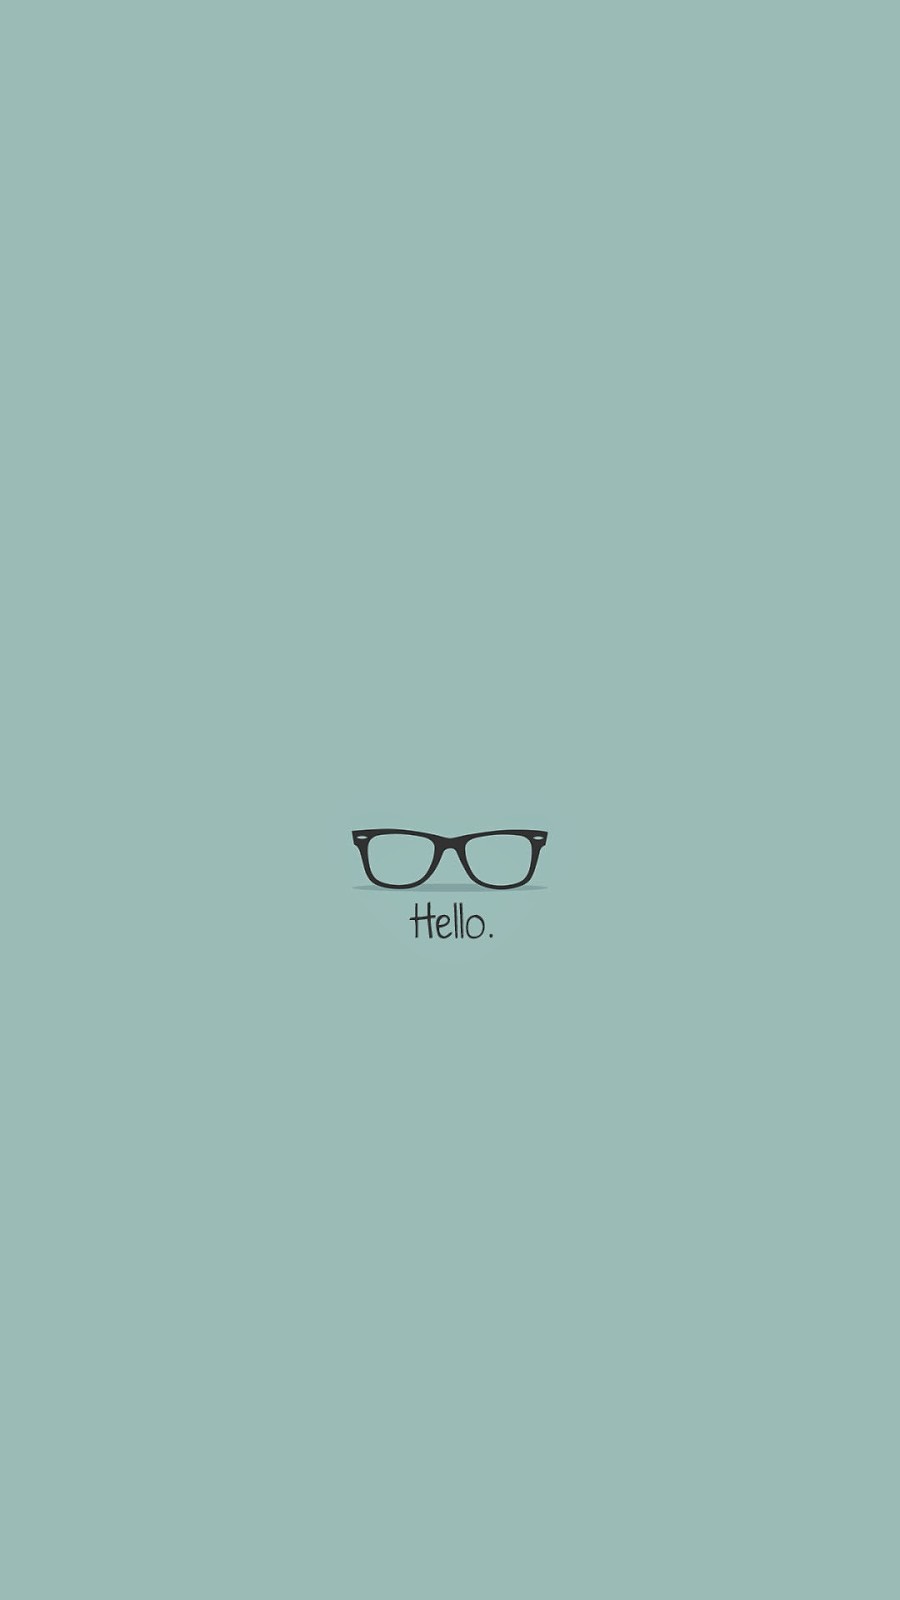 Hipster Glasses Hello Iphone 6 Wallpaper - Simple Wallpaper Iphone 6 - HD Wallpaper 